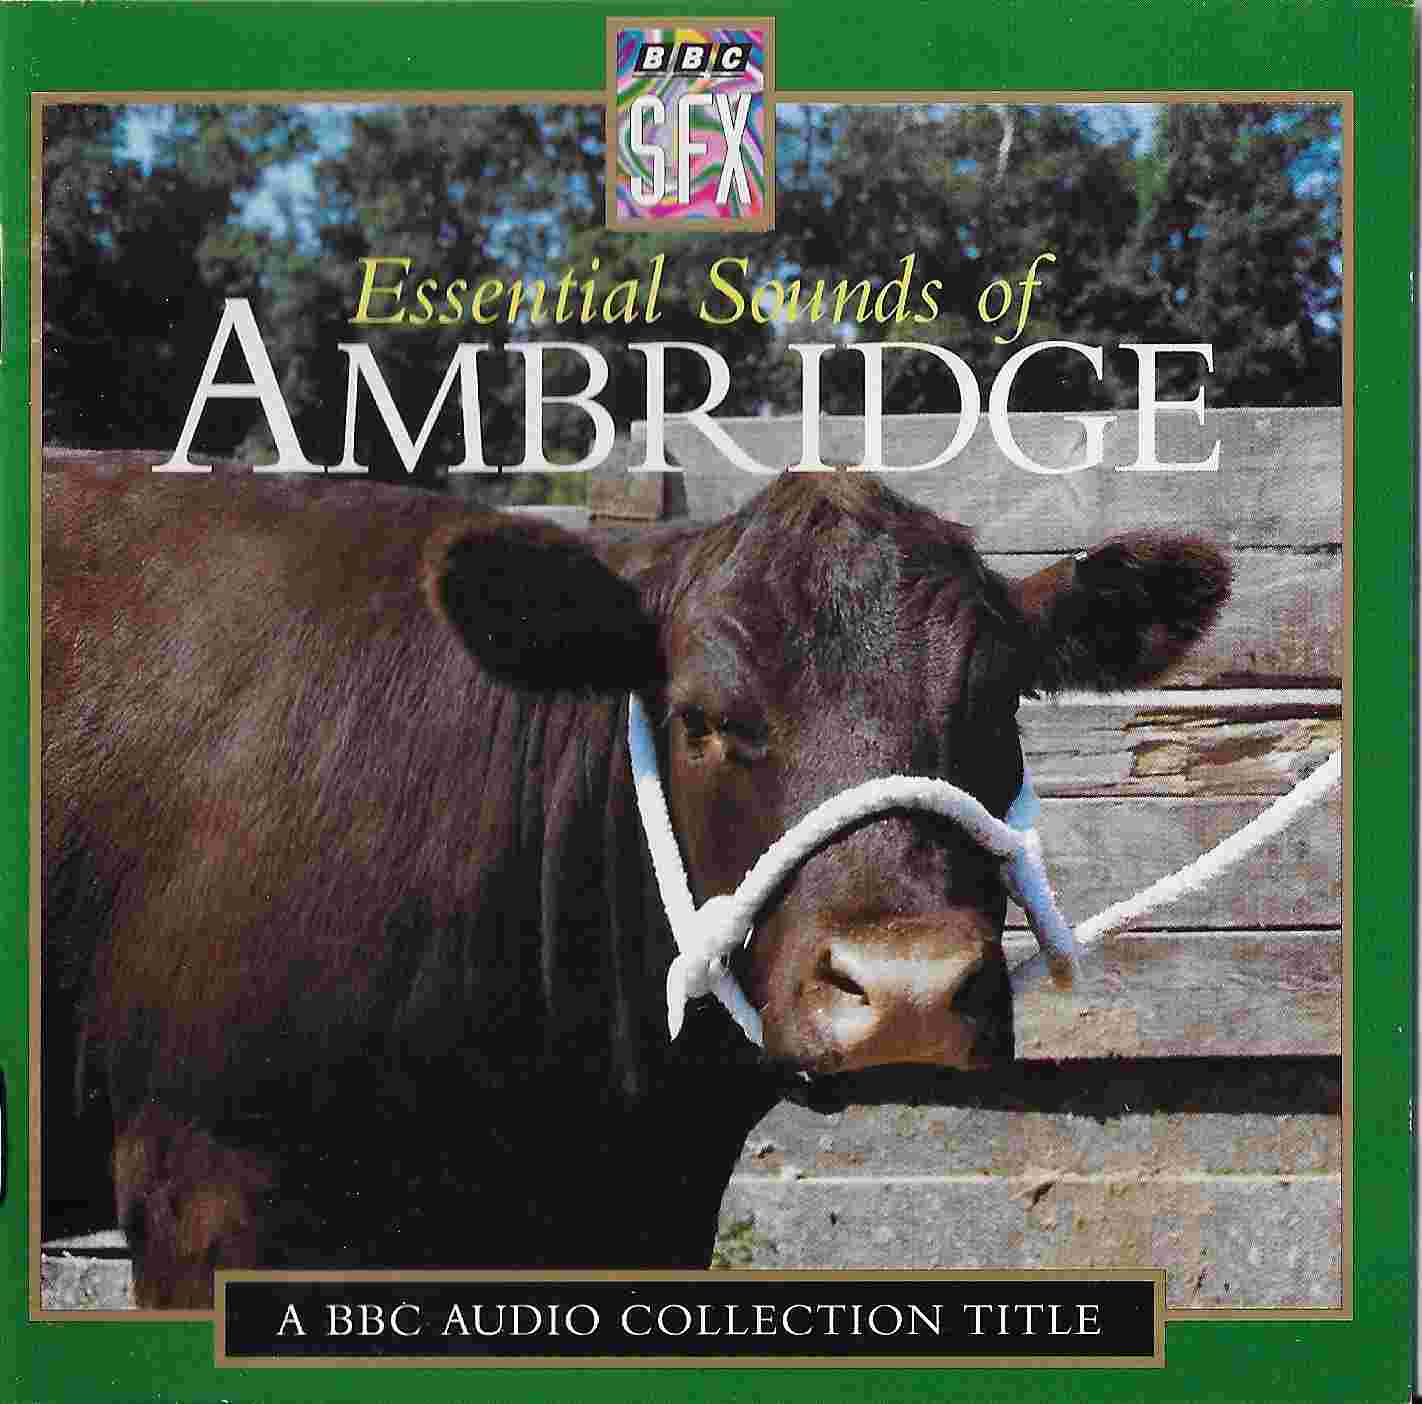 Picture of BBCCD873 Essential sounds of Ambridge by artist Various from the BBC cds - Records and Tapes library